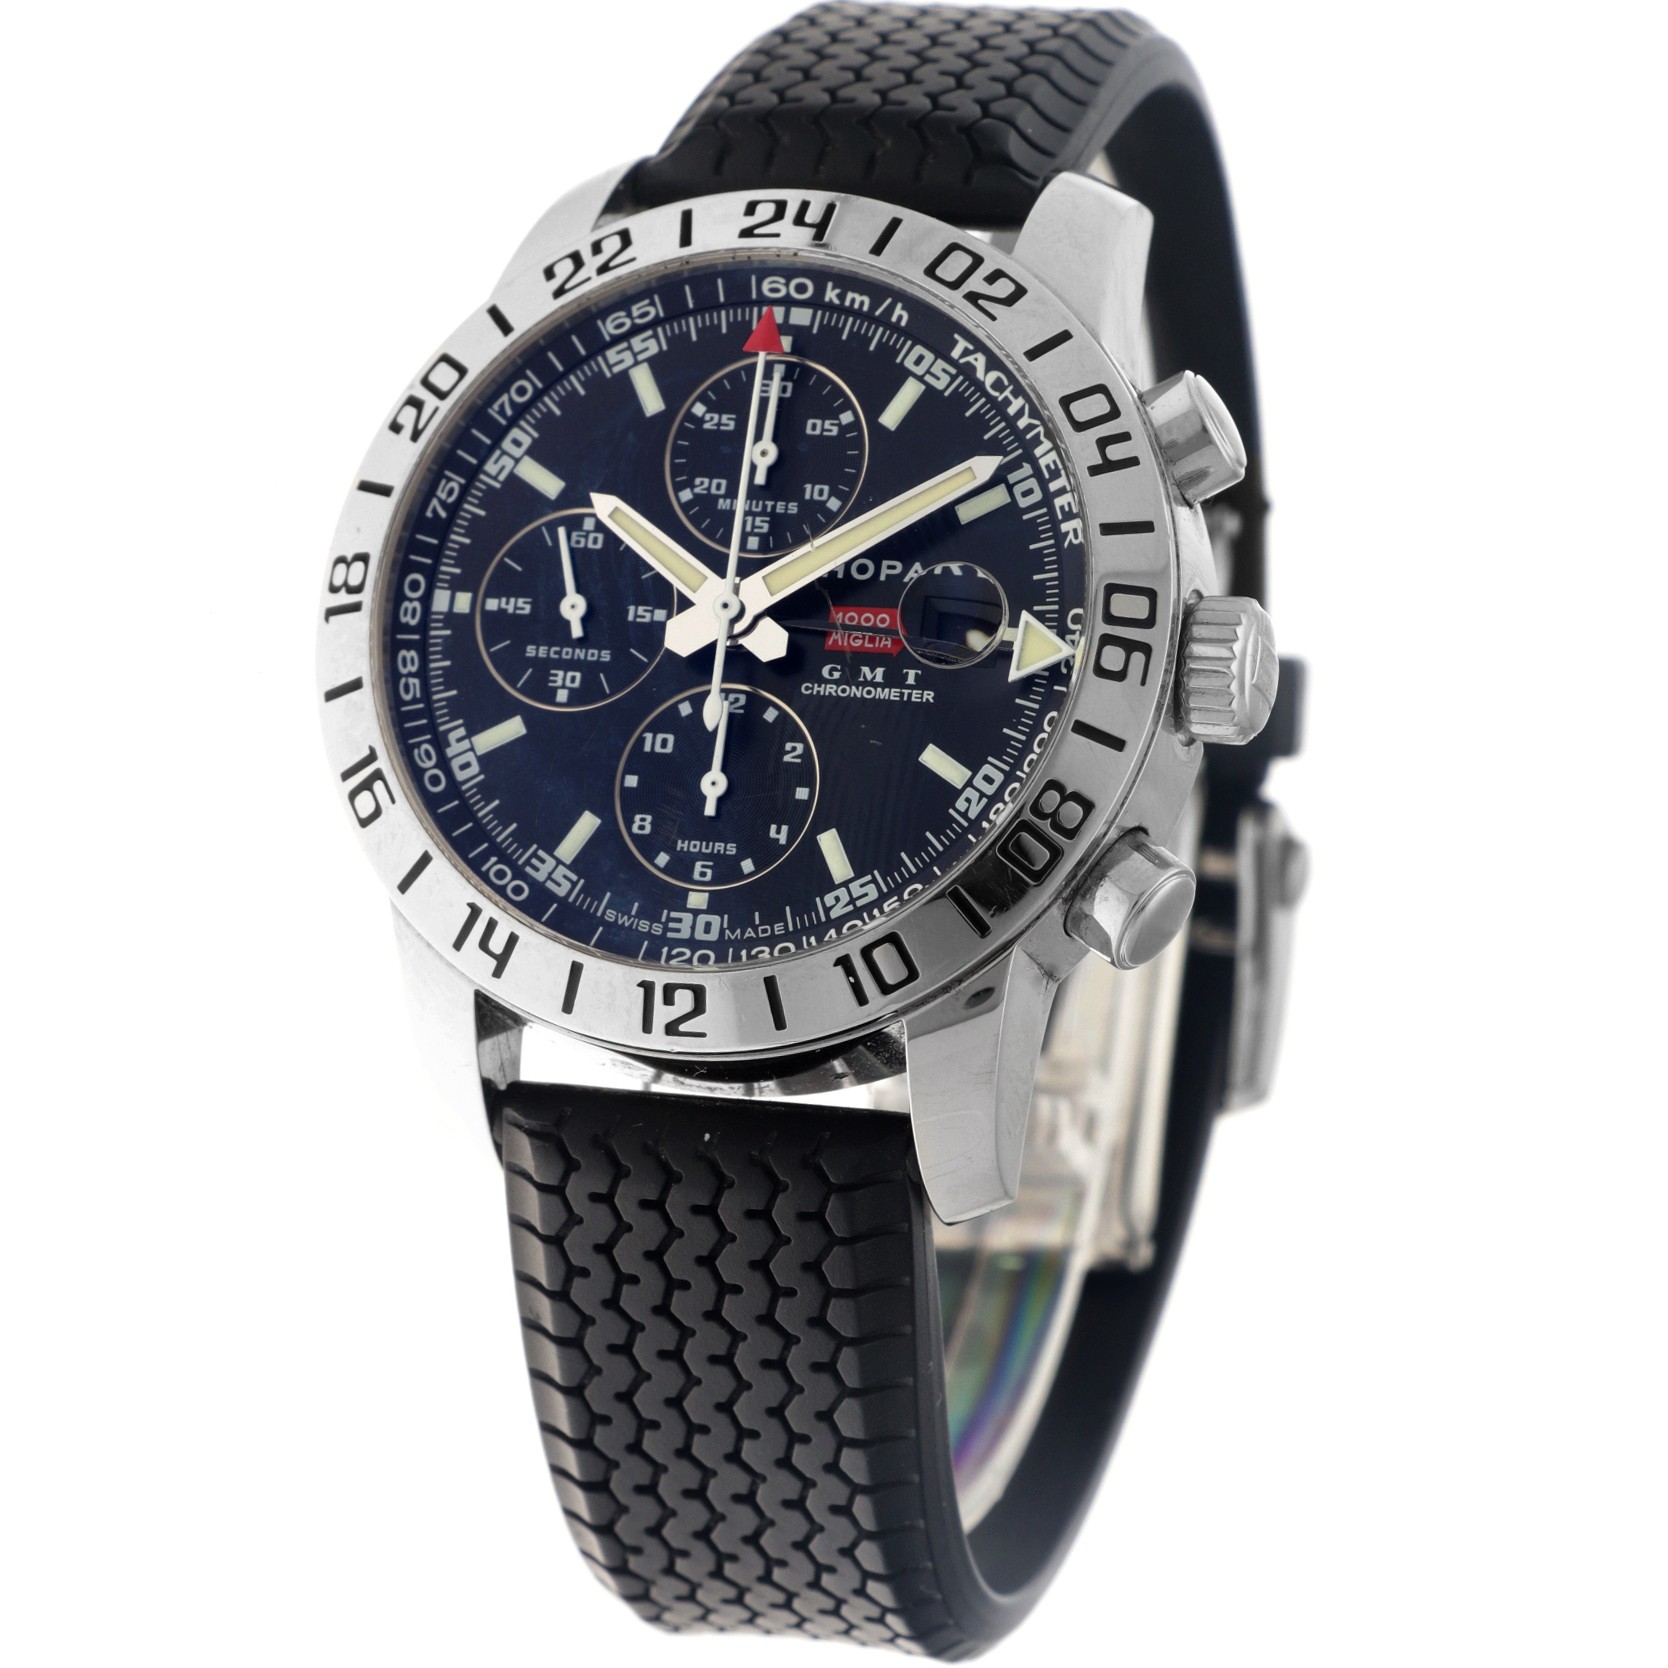 No Reserve - Chopard Mille Miglia 8992 - Men's watch.  - Image 2 of 5